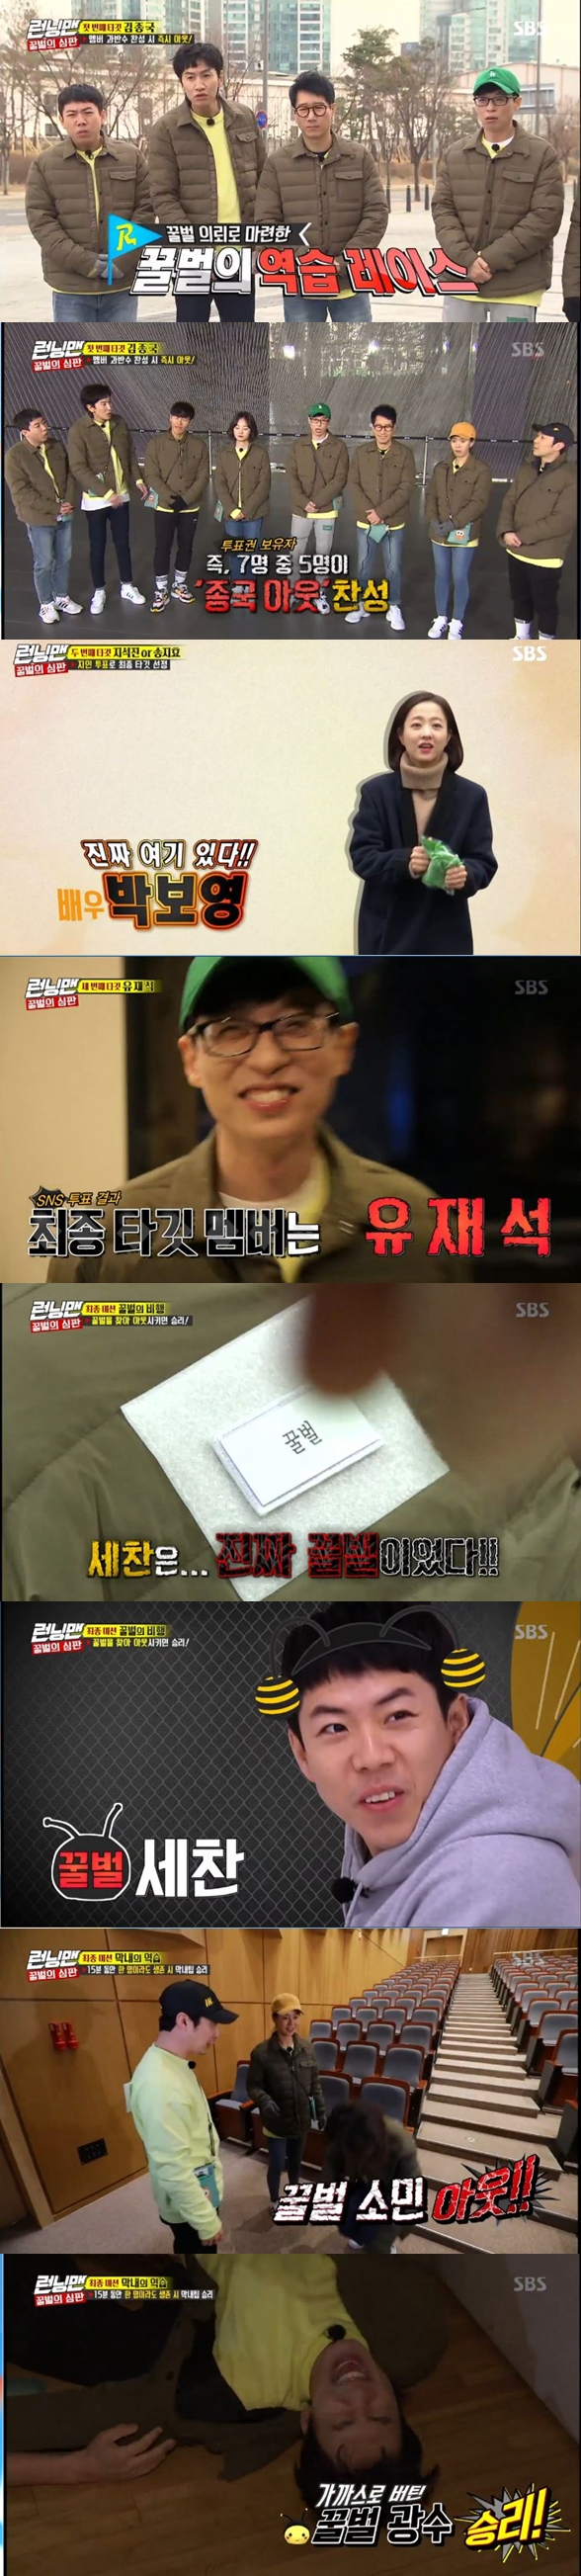 Lee Kwang-soo has done a good job as the youngest line leader.In the SBS entertainment program Running Man broadcasted on the afternoon of the 3rd, Race of Bees was held to judge the bees judging the members within the time limit.The first In-N-Out Burger subject of honey bees was Kim Jong-kook.The members who were opening the honeybee informed the members that the vote on Kim Jong-kook In-N-Out Burger began in the name of the crime that harassed the members every day.Lee Kwang-soo was angry, saying, Do not break us down.But no one could bear to laugh because Lee Kwang-soo knew he would not vote to stop Kim Jong-kook In-N-Out Burger.On the first mission, the members failed and lost one vote on Kim Jong-kook In-N-Out Burger.Members who received the knot-breaking mission were challenged in turn by Kim Jong-kook and Jeon So-min, Yoo Jae-Suk and Ji Suk-jin, Lee Kwang-soo and Yang Se-chan, but failed.Lee Kwang-soo and Yang Se-chan said, This is a lie, and did not accept the result when the crew easily solved the mission that everyone thought would not be able to do.As a result of the mission, the members were deprived of one vote, and the main character became Lee Kwang-soo.Kim Jong-kook had hope as Lee Kwang-soo was stripped of his voting rights.Kim Jong-kook, who wrote No in his voting rights, sighed with relief, saying, I have recently become close to the people, so I will not be in-N-Out Burger if I do well.Jeon So-min, who came then, also said, I didnt vote for In-N-Out Burger, making Kim Jong-kook more relieved.But with five votes in favor, Kim Jong-kook was hit by the In-N-Out Burger.All members except Haha voted to have Kim Jong-kook in-N-Out Burger.The next candidates for elimination were Ji Suk-jin and Song Ji-hyo.Kim Jong-kook was in-N-Out Burger, and the crew gave Haha, who was the only one to vote for No, a hint of bees.The production team designated Ji Suk-jin and Song Ji-hyo as candidates for elimination, saying, I will vote for entertainers and decide one final candidate.The members were invited from Nam Chang-hee, who can call the fastest, and Nam Chang-hee voted for one of the two and disappeared like a wind.While I was in the process of attracting a new celebrity acquaintance, a welcome guest came to the members.Park Bo-young, who was in a drama meeting nearby, came to greet the Running Man shooting car.Members asked Park Bo-young to vote for a candidate to be eliminated.Park Bo-young expressed Ji Suk-jin as Wangko type and Song Ji-hyo as his own sister, and the members were able to easily predict the results of the vote.Finally, the second candidate was decided to drop out after finishing the vote to Hwang Je-seong.As everyone expected, Ji Suk-jin was eliminated after being voted down, but the crew raised the members curiosity, saying, Ji Suk-jin will be eliminated in 30 minutes.If Ji Suk-jin is not eliminated in 30 minutes, the candidate for elimination will remain Ji Suk-jin, the production team said, so the members took a vital role in protecting Ji Suk-jin.Members did not slow down to keep Ji Suk-jin from being an In-N-Out Burger while eating.The members were nervous even when the employee came only behind Ji Suk-jin; only then did Lee Kwang-soo and Yang Se-chan even stop the entrance.But nothing happened until ten minutes. The door opened and Kim Jong-kook came in.Kim Jong-kook shook off the members and at once got the name tag of Ji Suk-jin, and the members continued to suspect Kim Jong-kook as a bee.Ji Suk-jin was eliminated and Haha and Yoo Jae-Suk were selected as new elimination candidates; the production team said, I will decide the final elimination candidate by SNS vote among the two.The two of them posted a video on SNS asking for their lives with a poor face. SNS vote resulted in Yoo Jae-Suk becoming the final candidate for elimination.Yoo Jae-Suk becomes final target, and members enter Race to Find BeesHowever, since the hints about honey bees were only Yoo Jae-Suk, the members joined forces to find the missing Yoo Jae-Suk.Members who were looking for Yoo Jae-Suk found Ji Suk-jin tied to a chair, but the members ripped his name tag in suspicion of Ji Suk-jin asking them to release it.But there was nothing on Ji Suk-jins back, and he fell victim to In-N-Out Burger.Lee Kwang-soo, who was alone on the first floor, found a bee and took his name tag.However, the identity of the person wearing the honey bee costume was Yoo Jae-Suk, and 15 minutes of time limit was activated as he was in-N-Out Burger.Yoo Jae-Suk named Yang Se-chan as a honeybee before being an In-N-Out Burger, and the members had taken the name tag of Yang Se-chan.Yoo Jae-Suk guessed Yang Se-chan as a chance he received, and the honey bee was actually Yang Se-chan.But even if Yang Se-chan was an In-N-Out Burger, the race was not over.Song Ji-hyo found Kim Jong-kook and Jeon So-min were bees in the hints he got by catching Yoo Jae-Suk, and went to find the two.But Kim Jong-kook was also tied to another room, and when Haha released his rope, he took part in Race, saying he was not a sewer anymore.The hint Kim Jong-kook sat on was my, and the members found that Jeon So-min was a bee, but the youngest line was Lee Kwang-soo.Lee Kwang-soo was found by Kim Jong-kook with 10 seconds left in the situation where Jeon So-min was in-N-Out Burger, but he did not catch it and led the honeybee corps to victory.